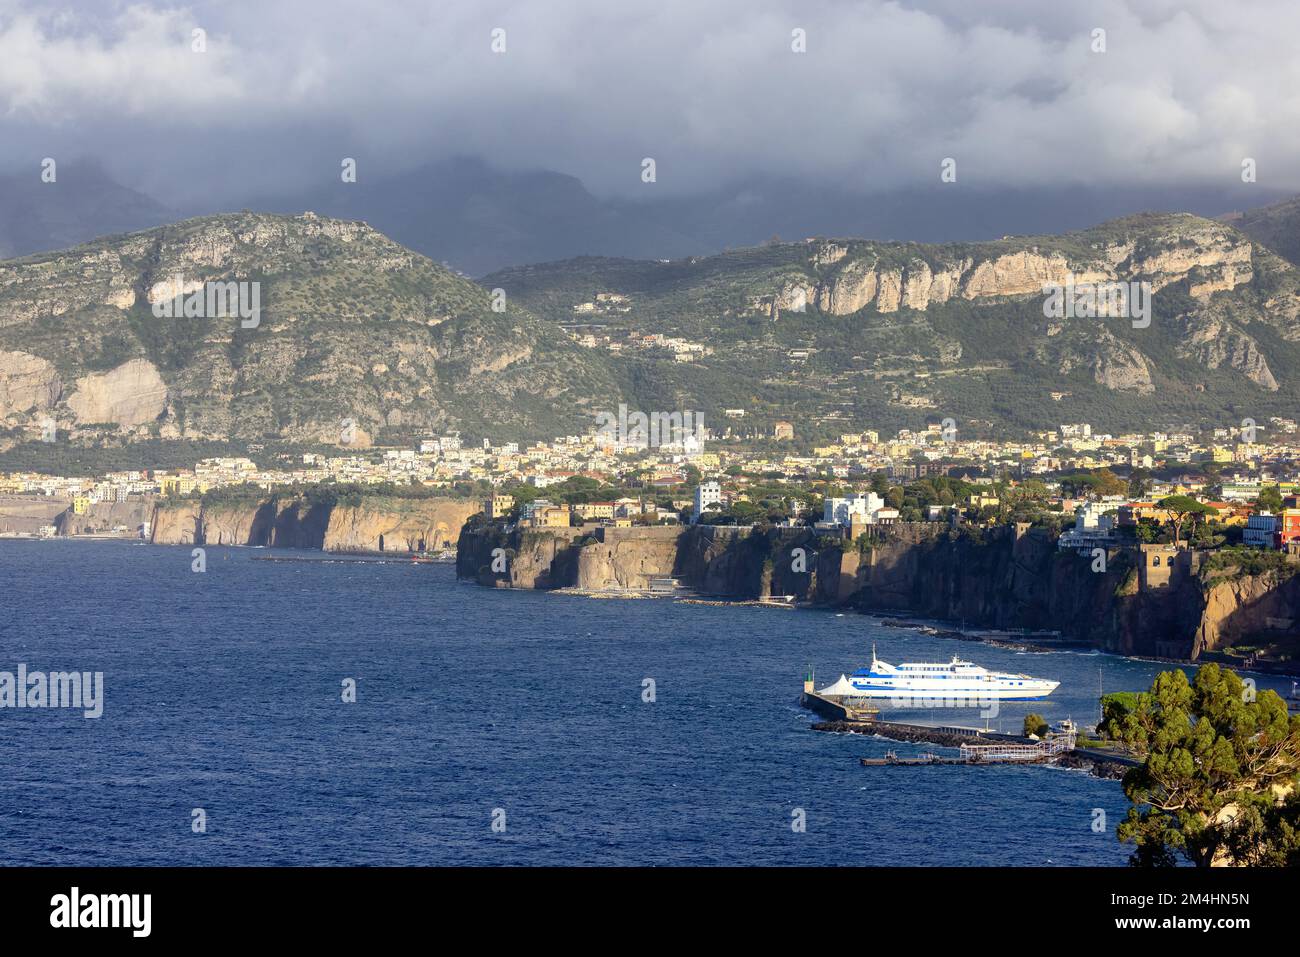 Rocky Coast and Homes in Touristic Town, Sorrento, Italy Stock Photo